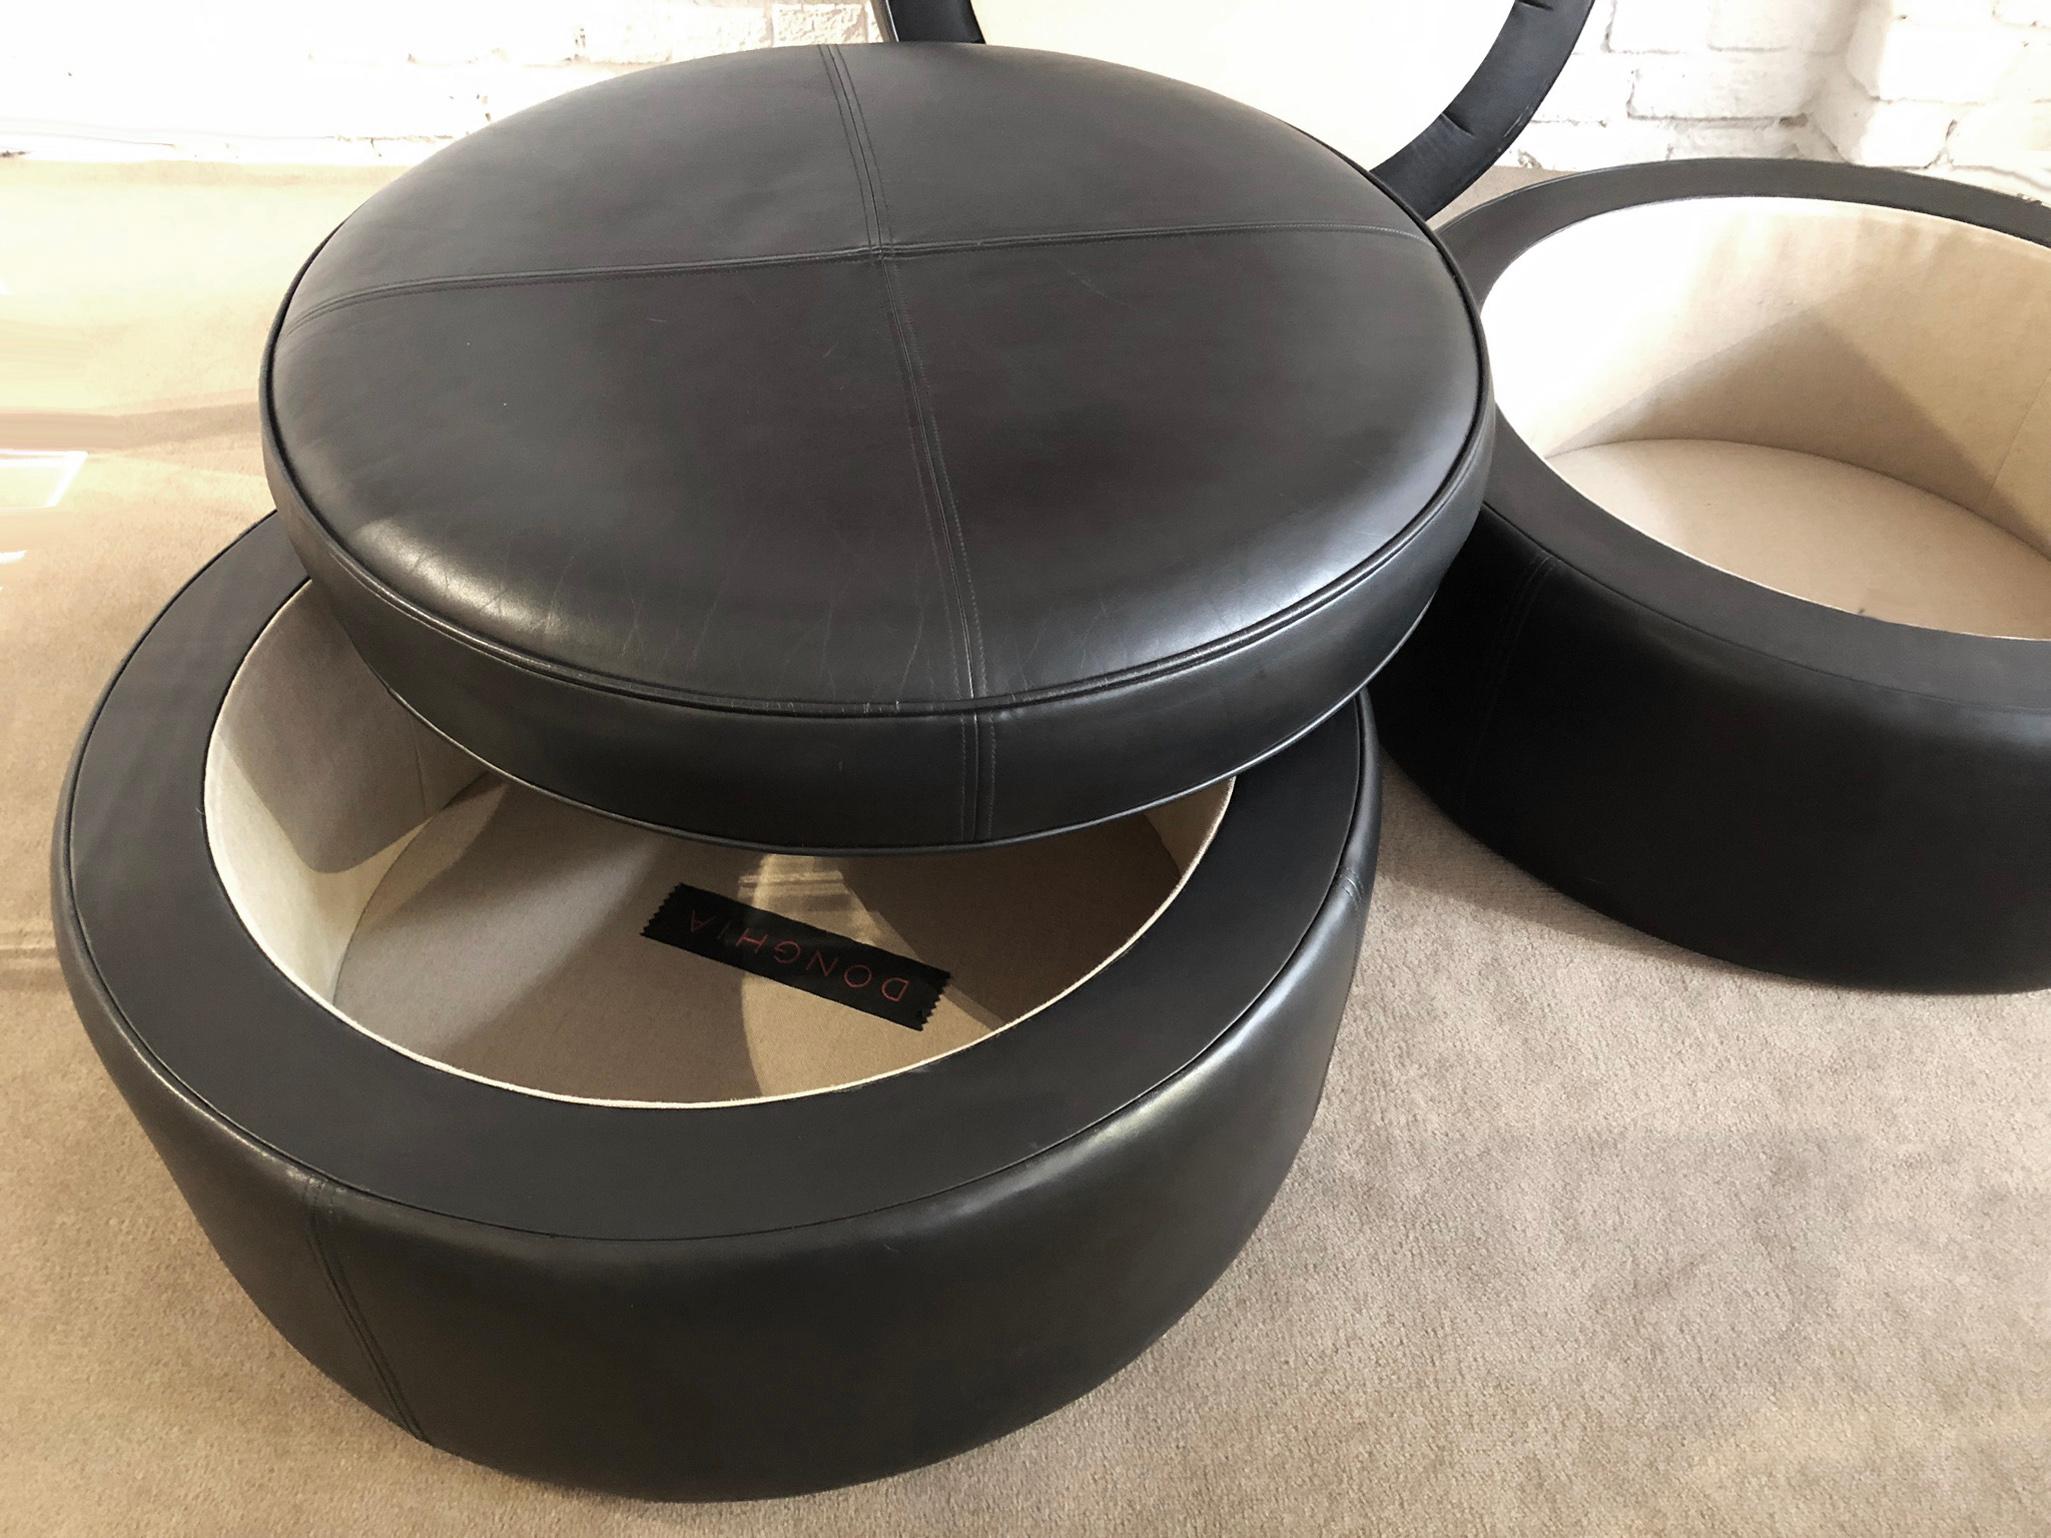 Leather ottomans made by Donghia. Features upholstered interiors for storage. Retains the original 
Donghia label. Excellent for additional seating. Top quality materials and craftsmanship. Price is for the pair.


Complementary delivery in the Los